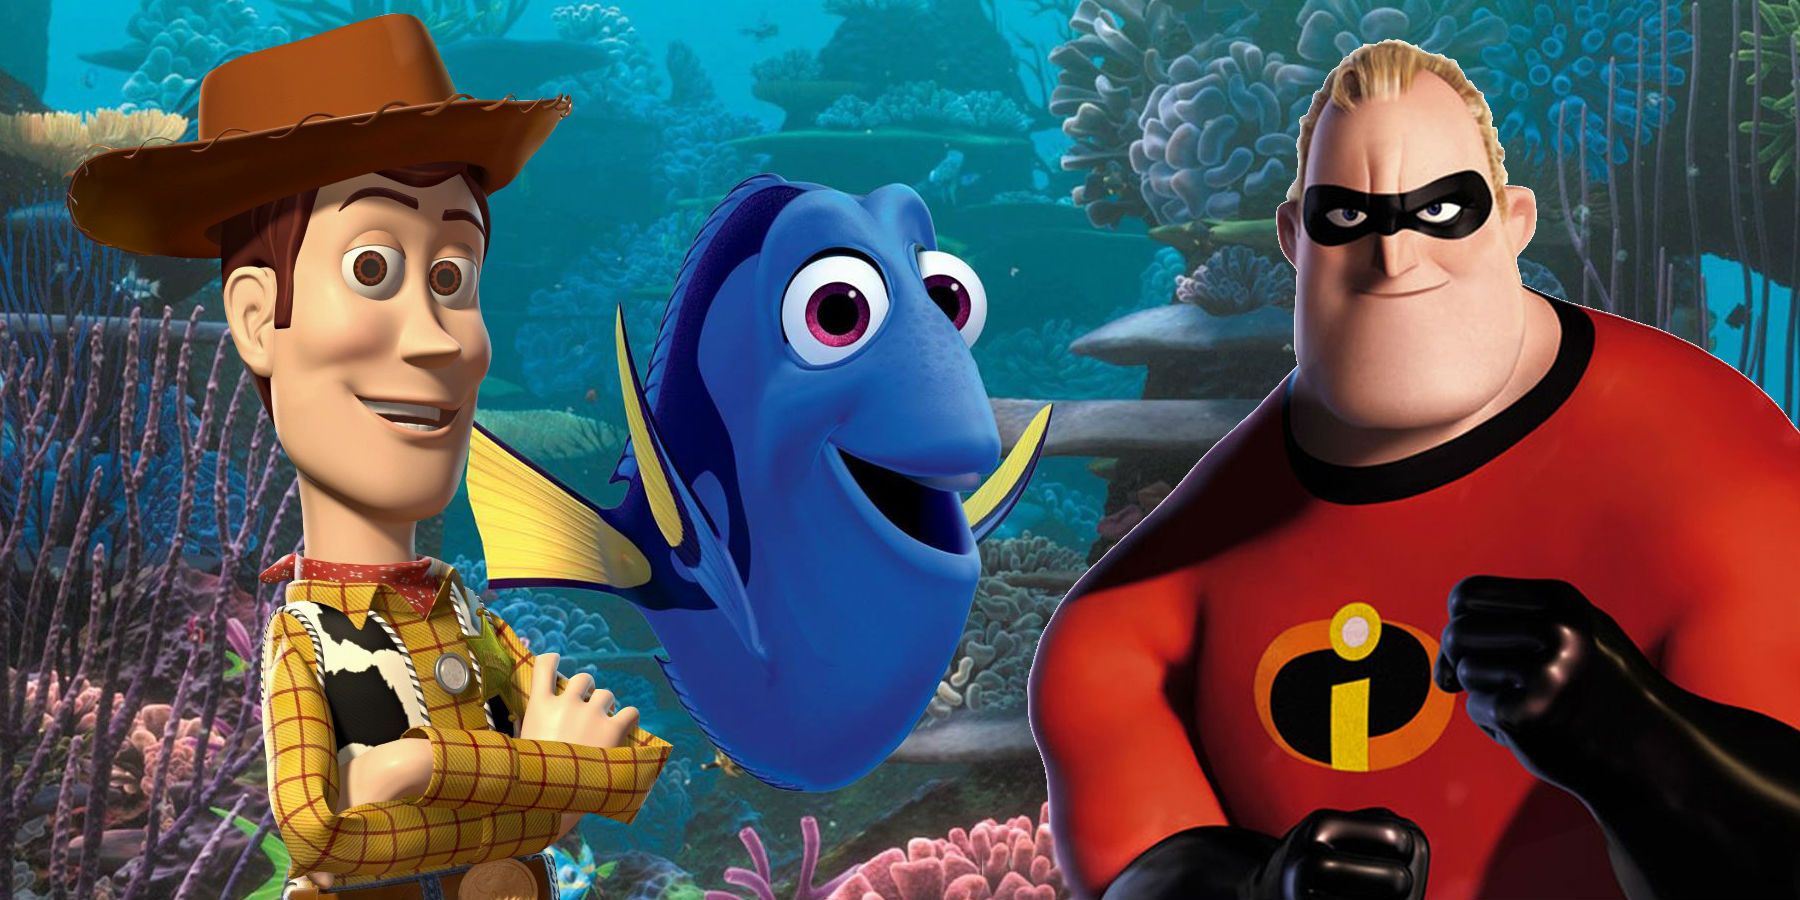 Pixar sequels Finding Dory Toy Story 4 Incredibles 2